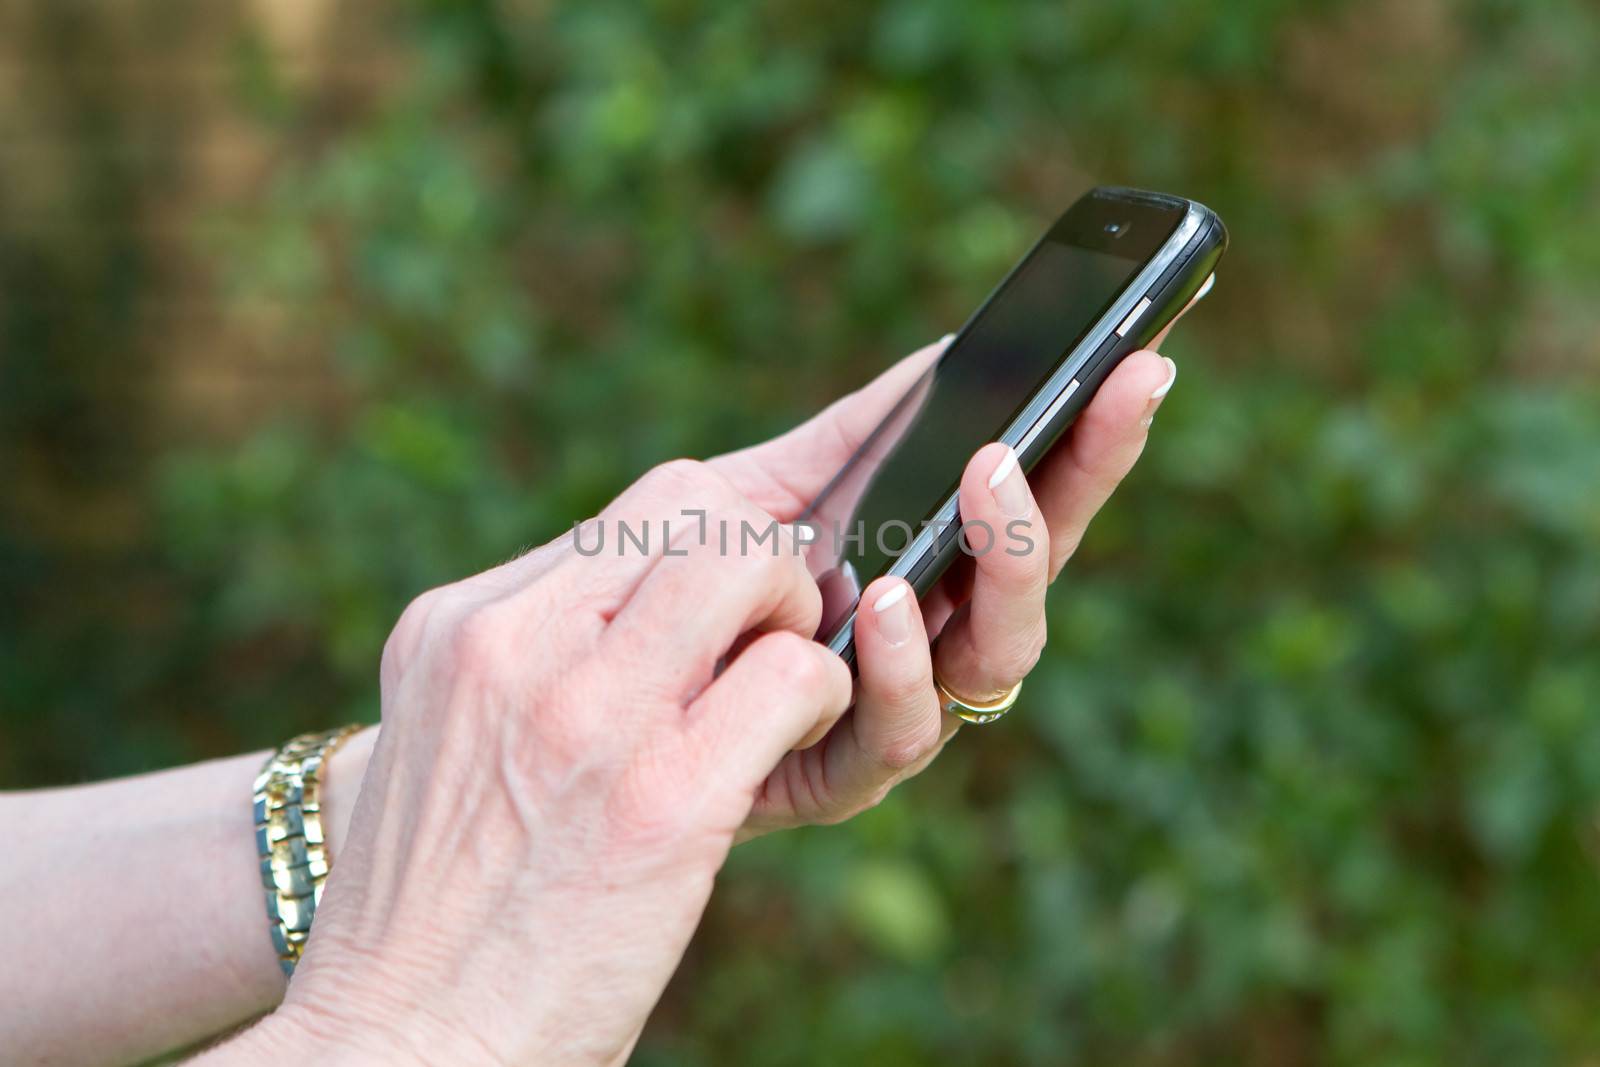 Businesswoman's hands texting on a smart phone or cell phone.